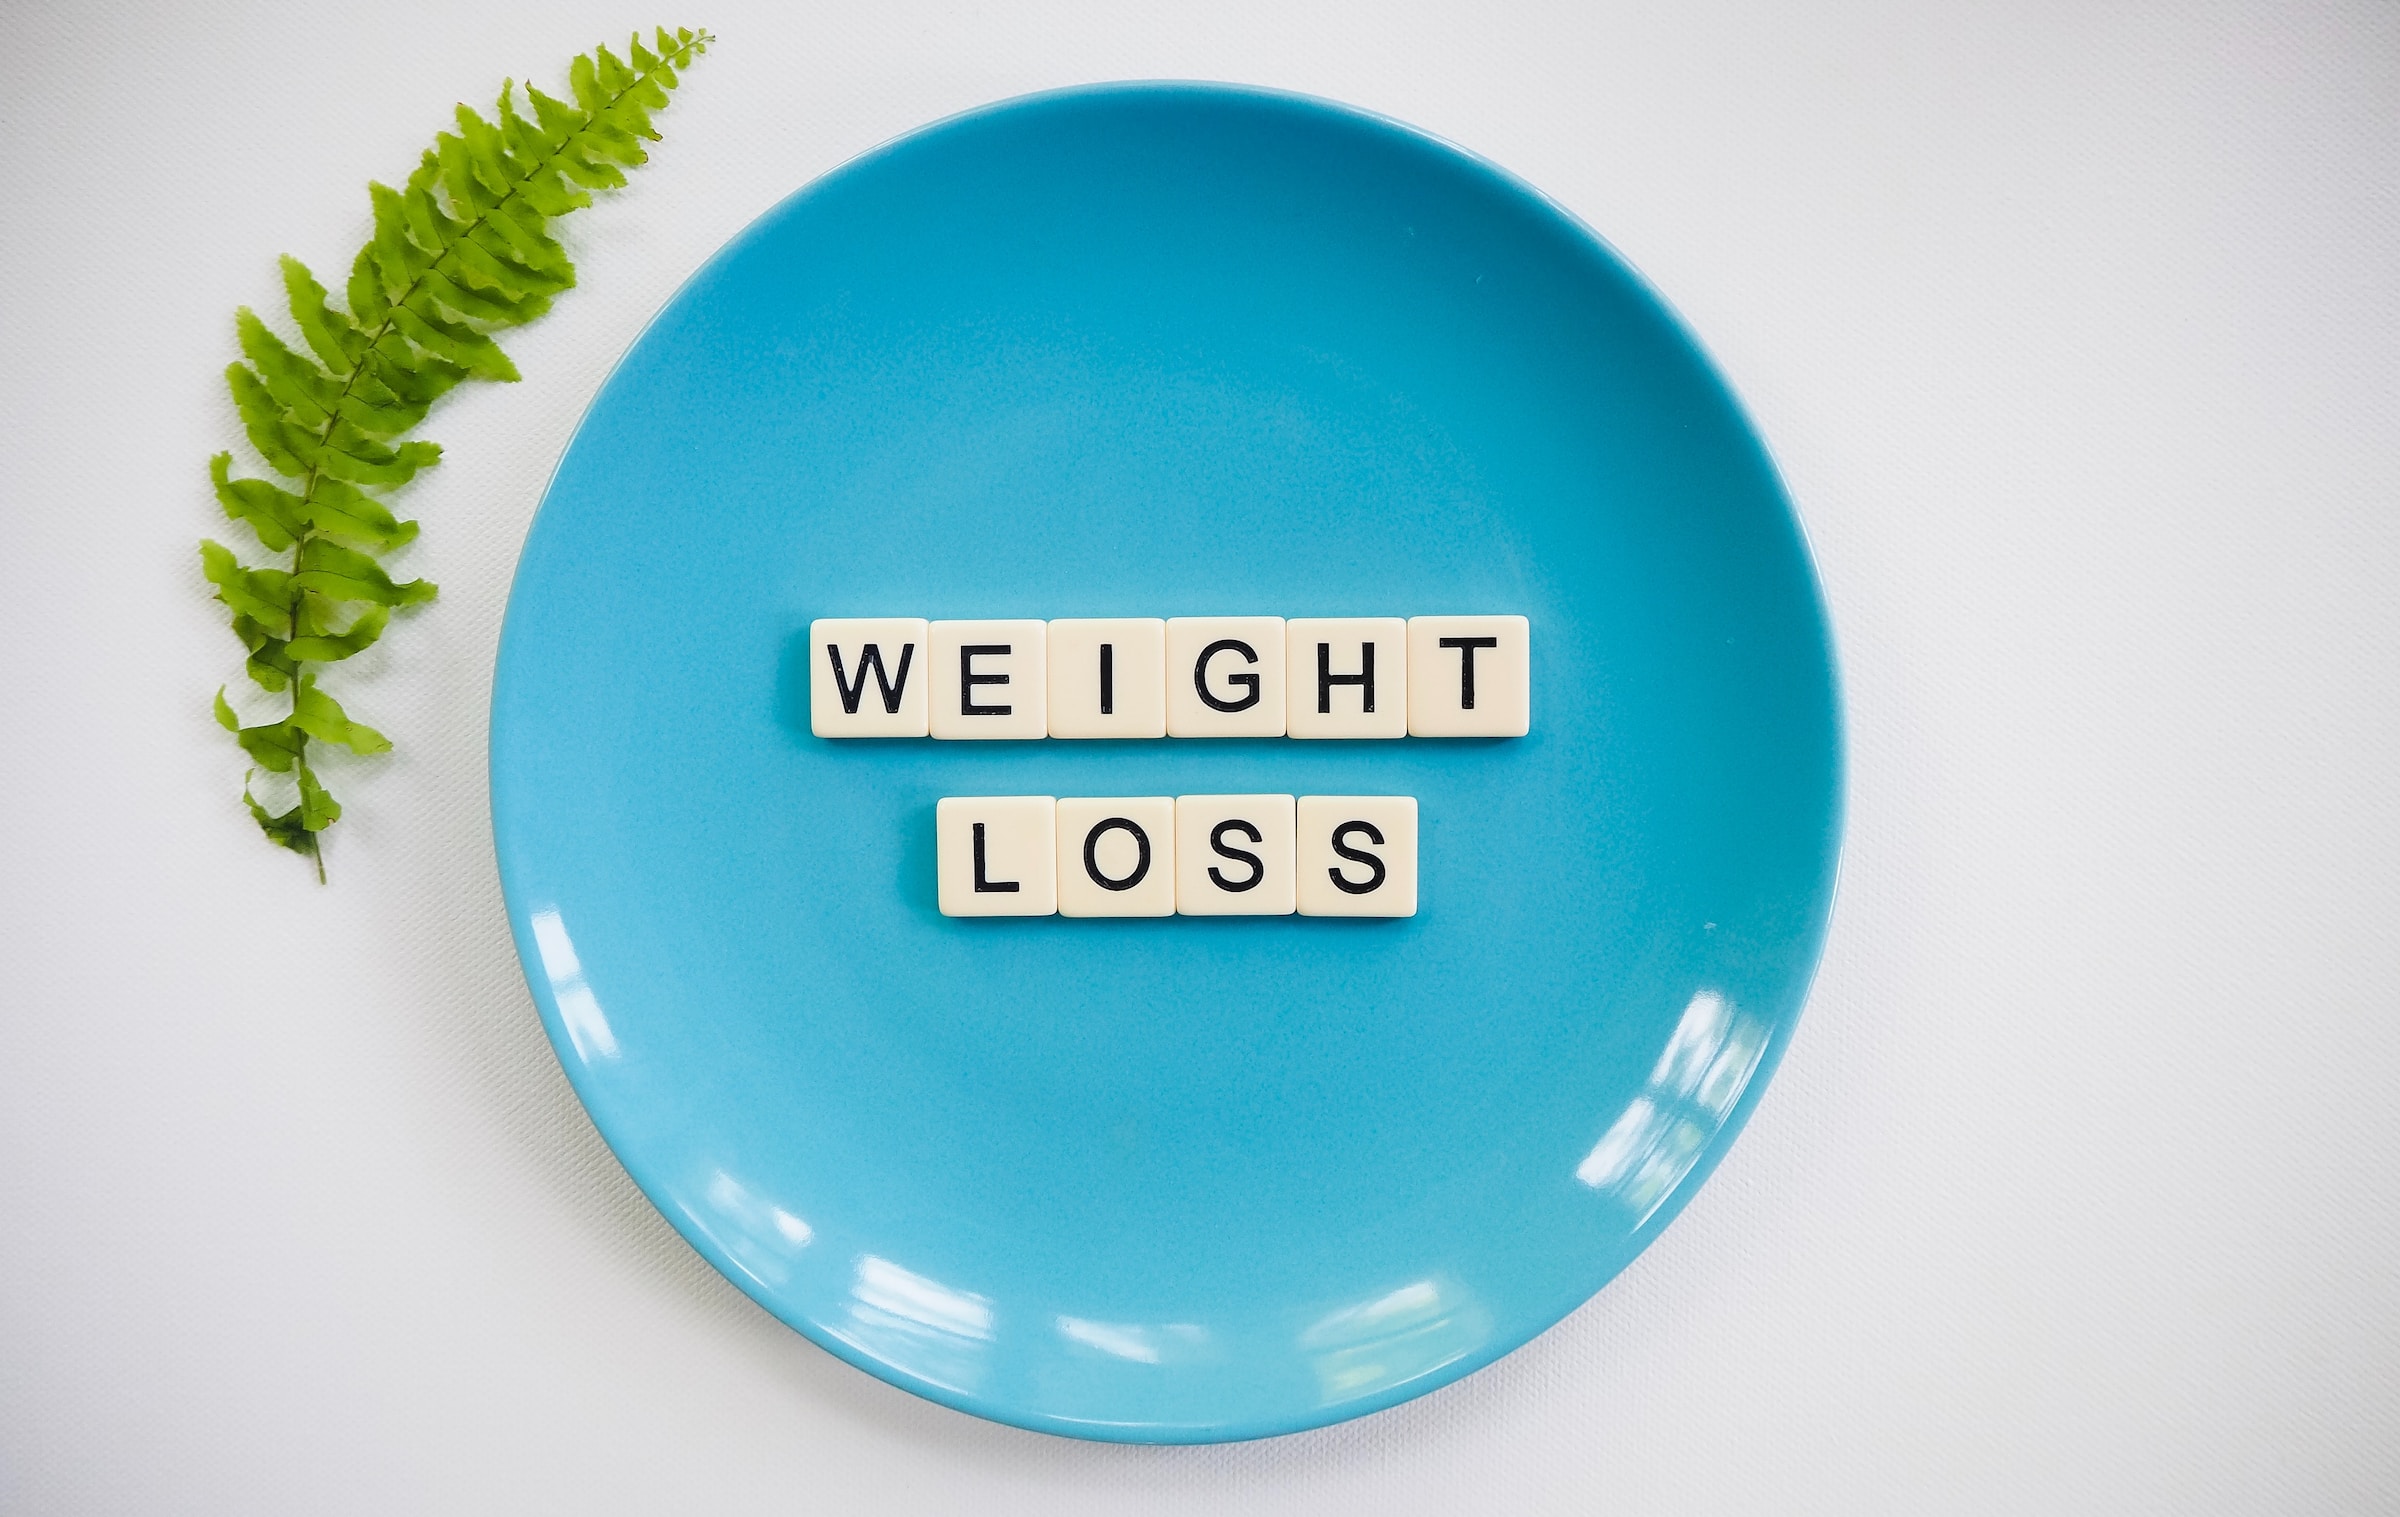 Tips for Losing Weight Safely and Naturally